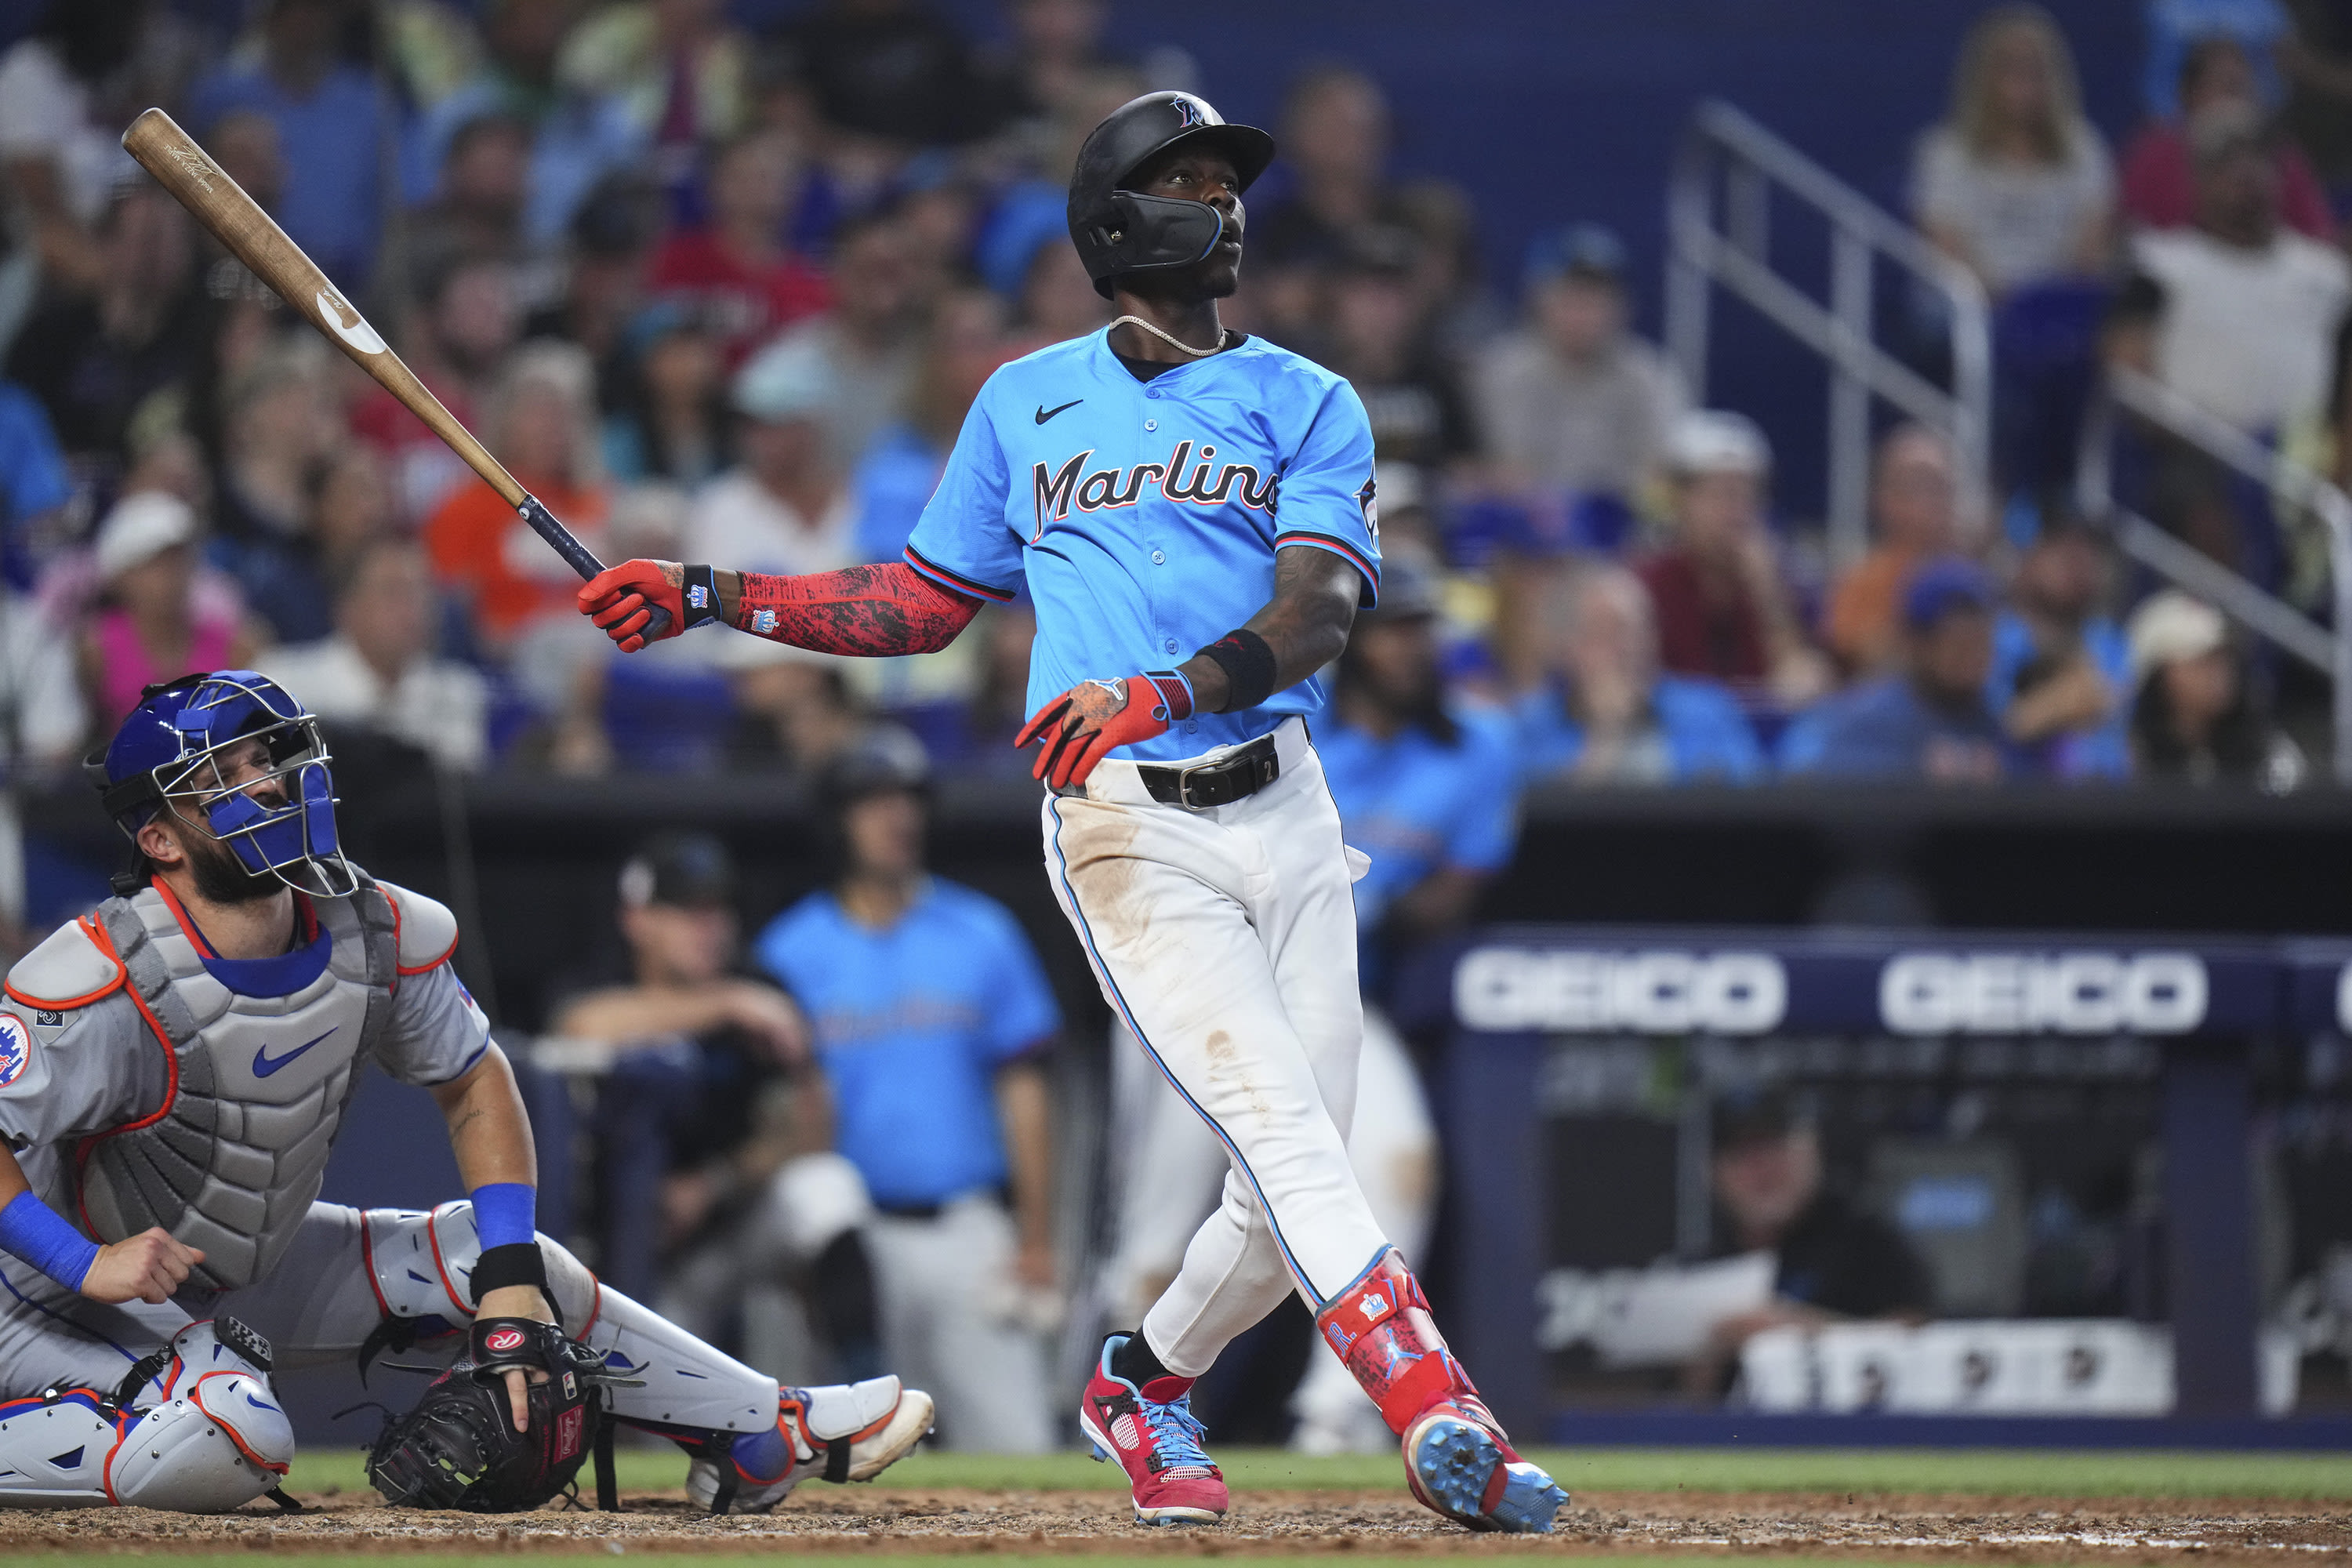 Yankees acquiring outfielder Jazz Chisholm Jr. in deal with Marlins: reports